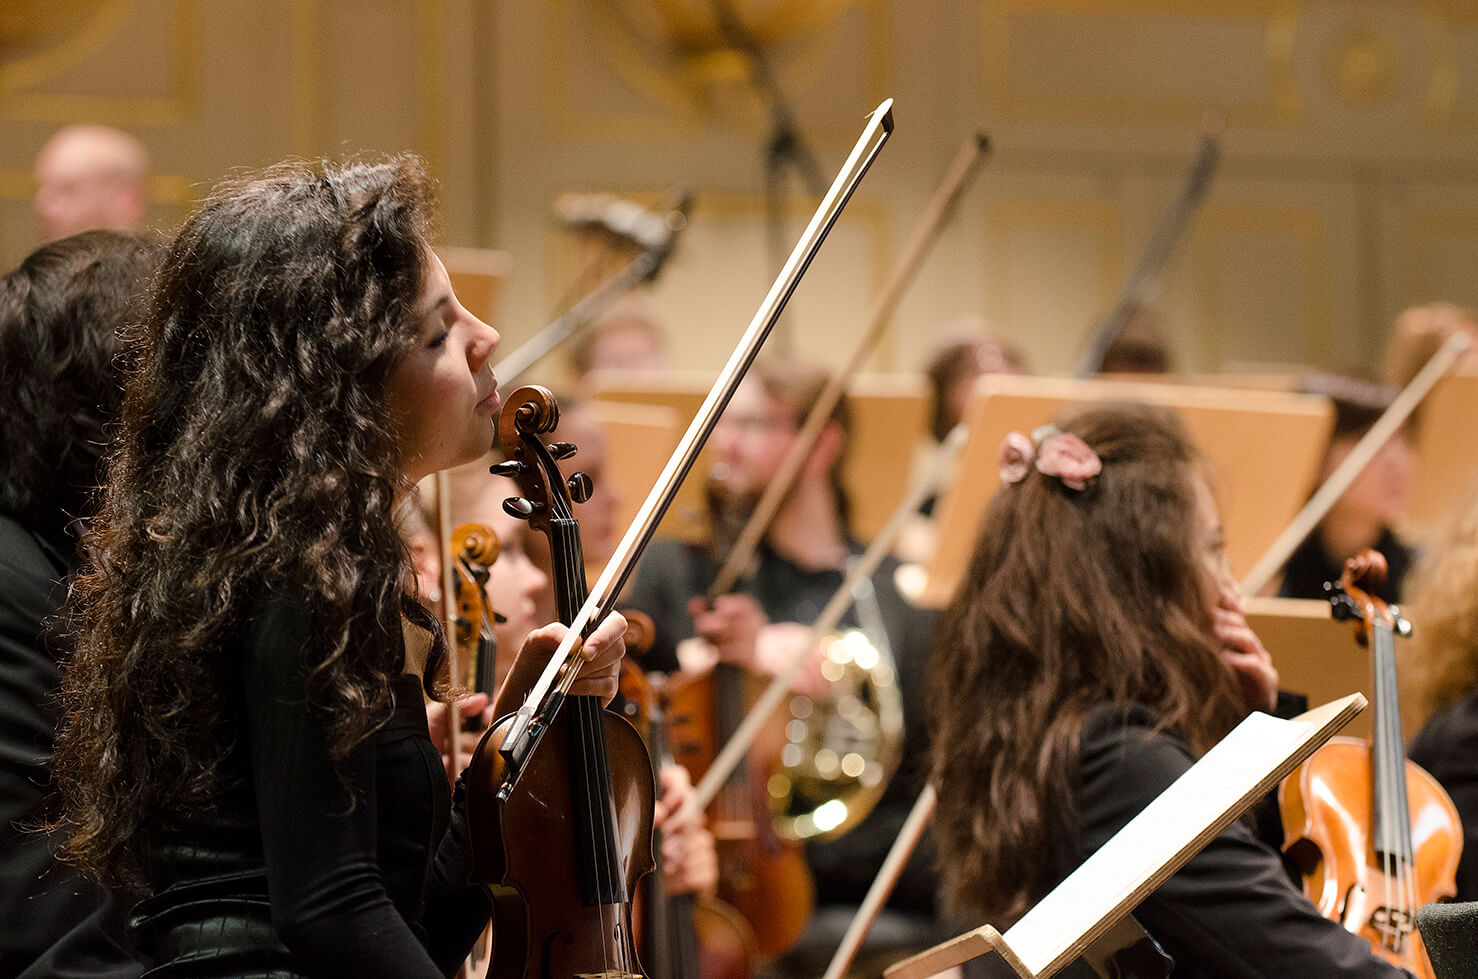 Zurich University of the Arts: Where musical talent transforms into virtuosity